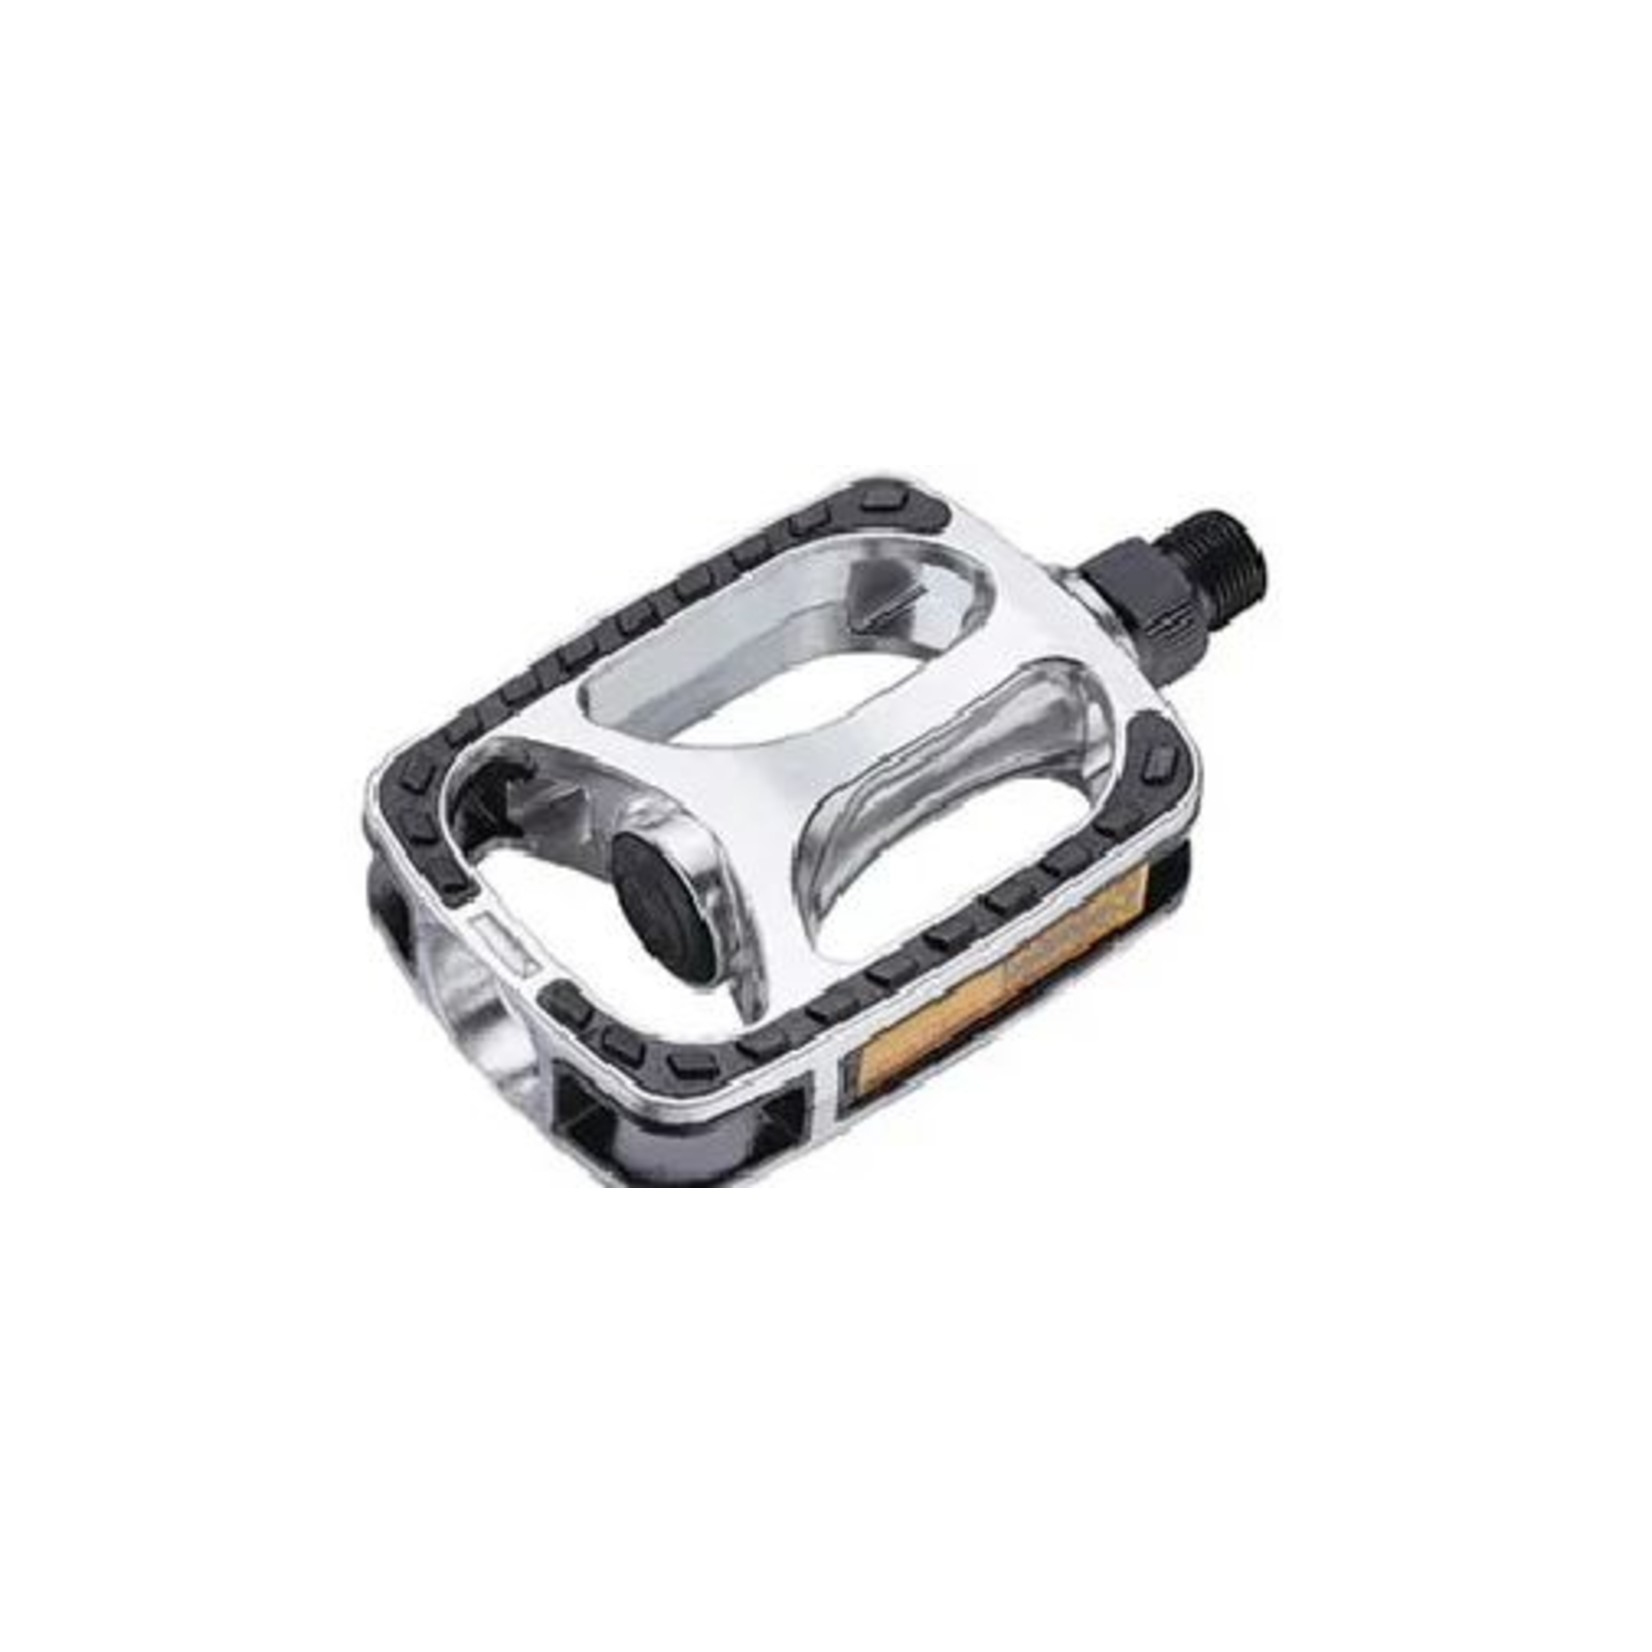 Incomex Trading Pty Ltd VP Pedals 9/16" City/Comfort - Alloy - Silver/Black